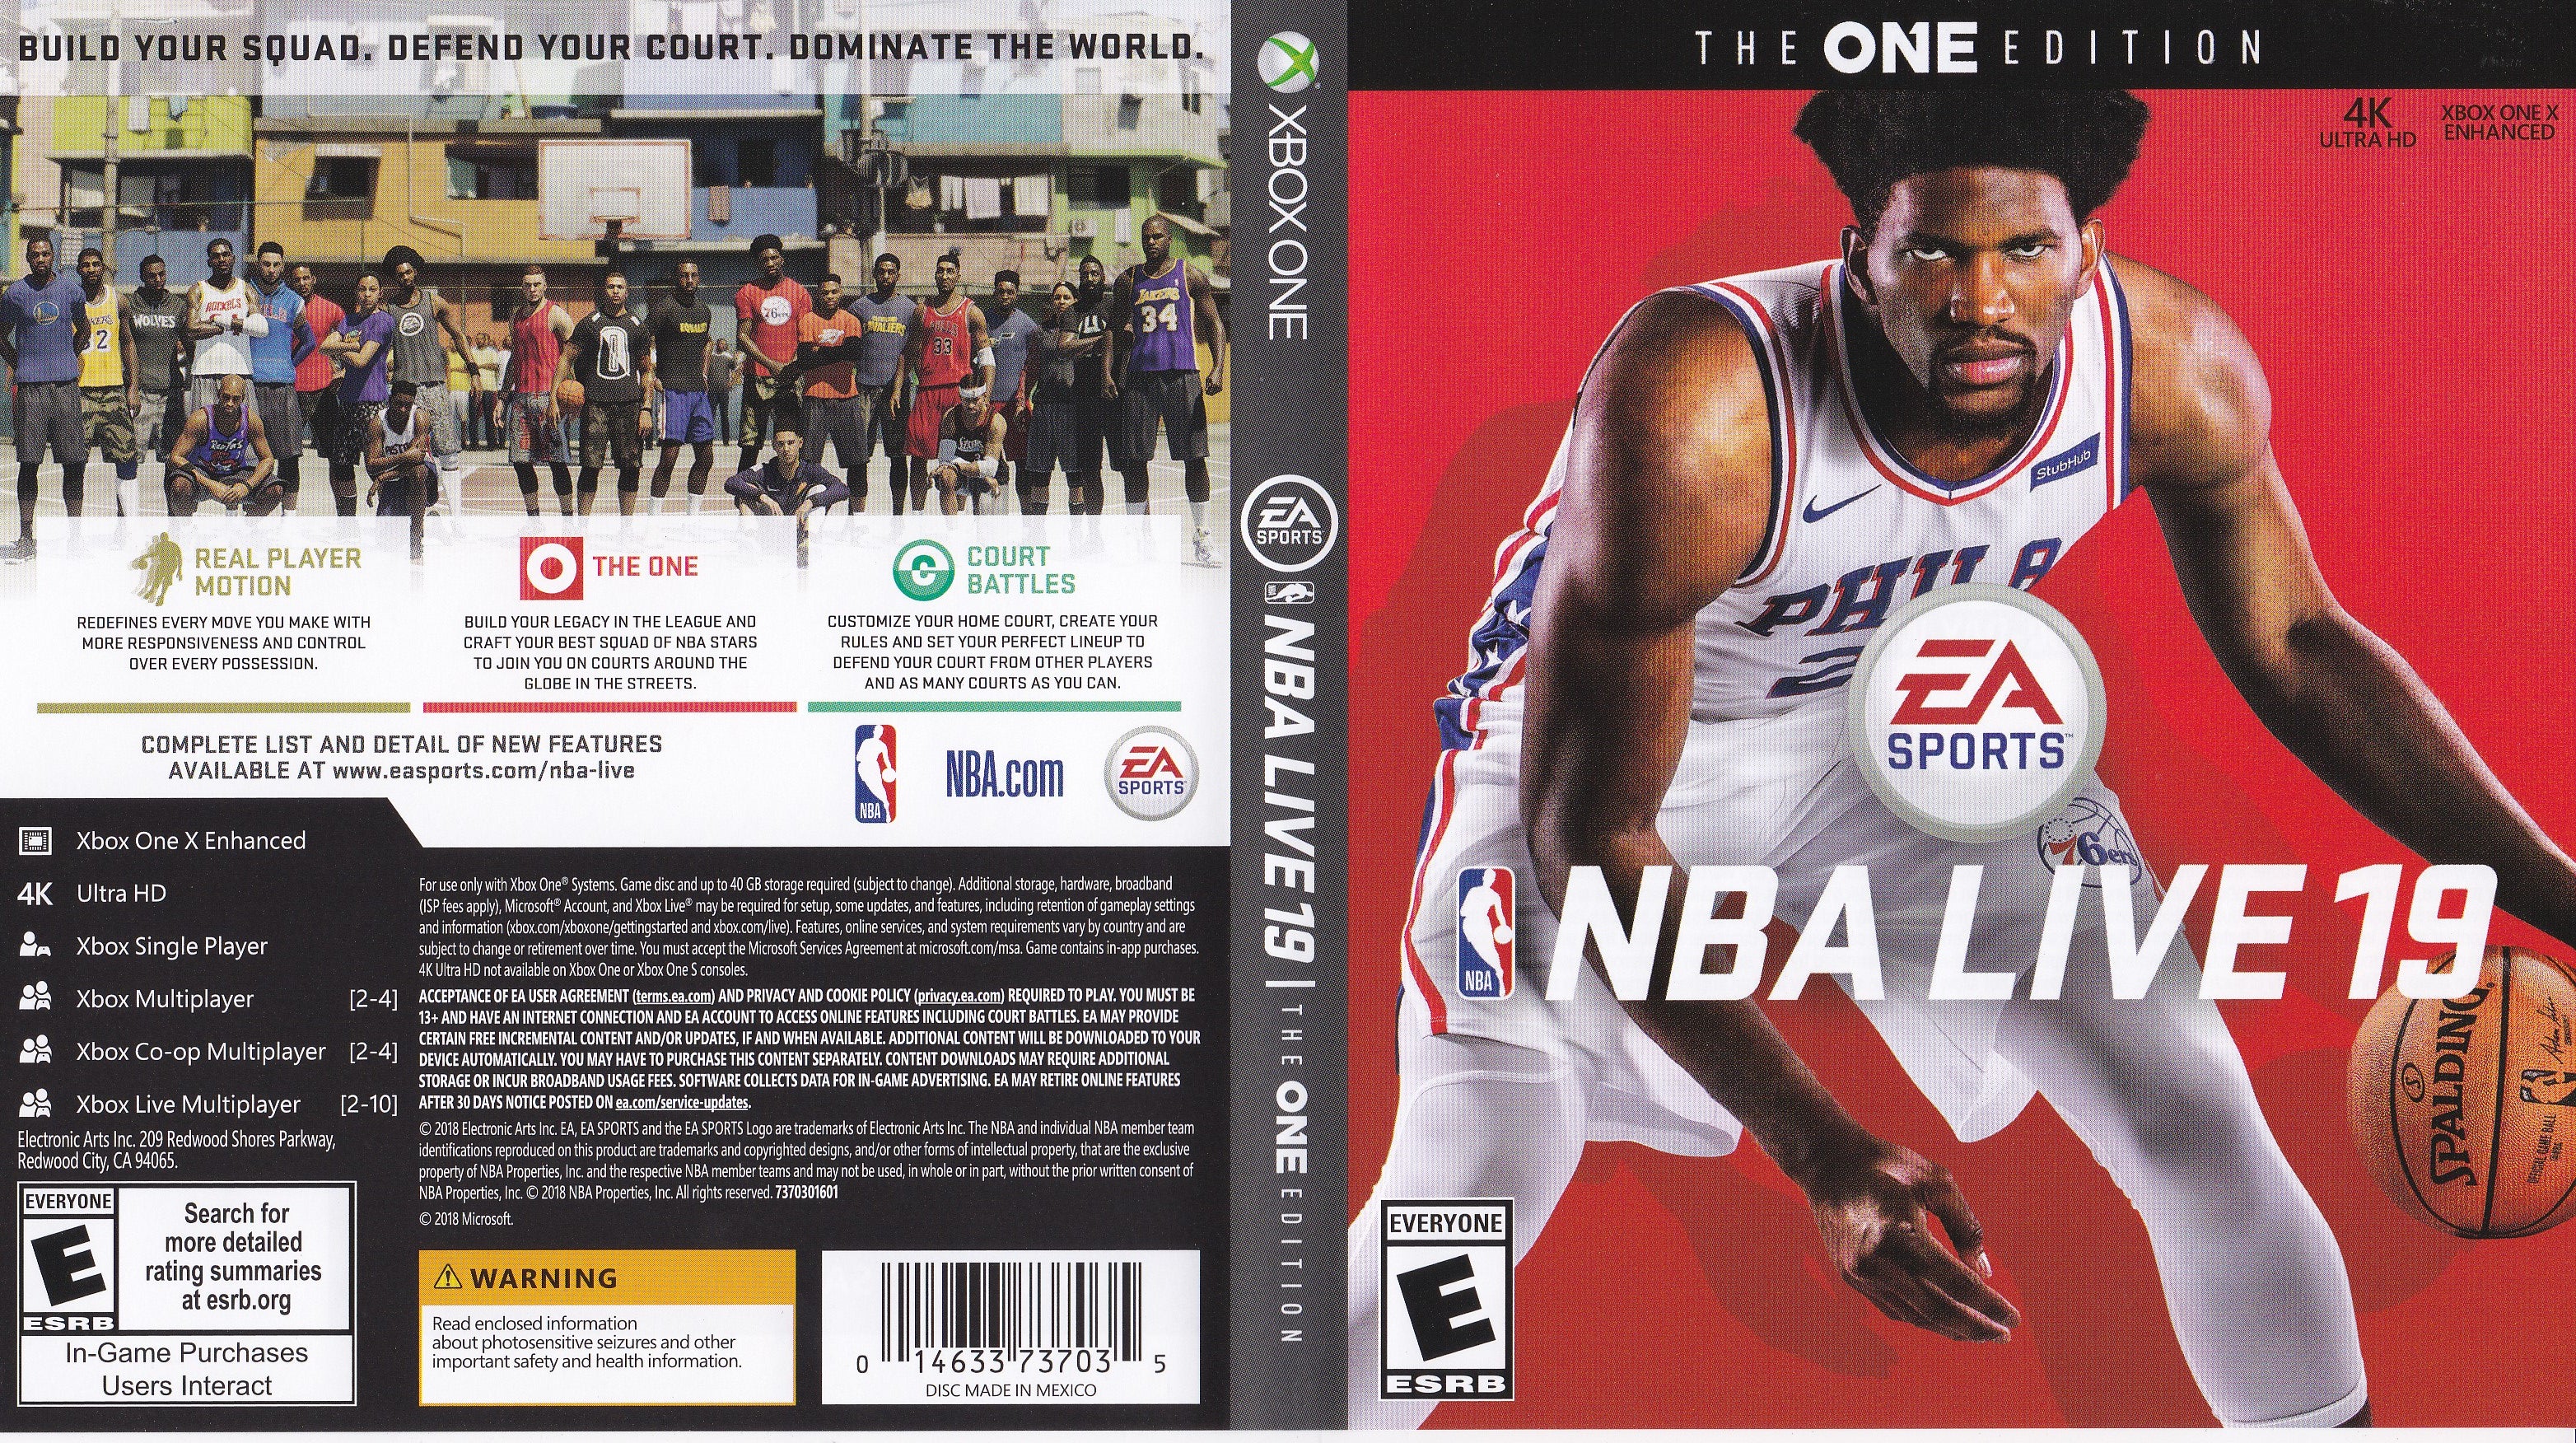 NBA LIVE 19 THE ONE EDITION escapeauthority